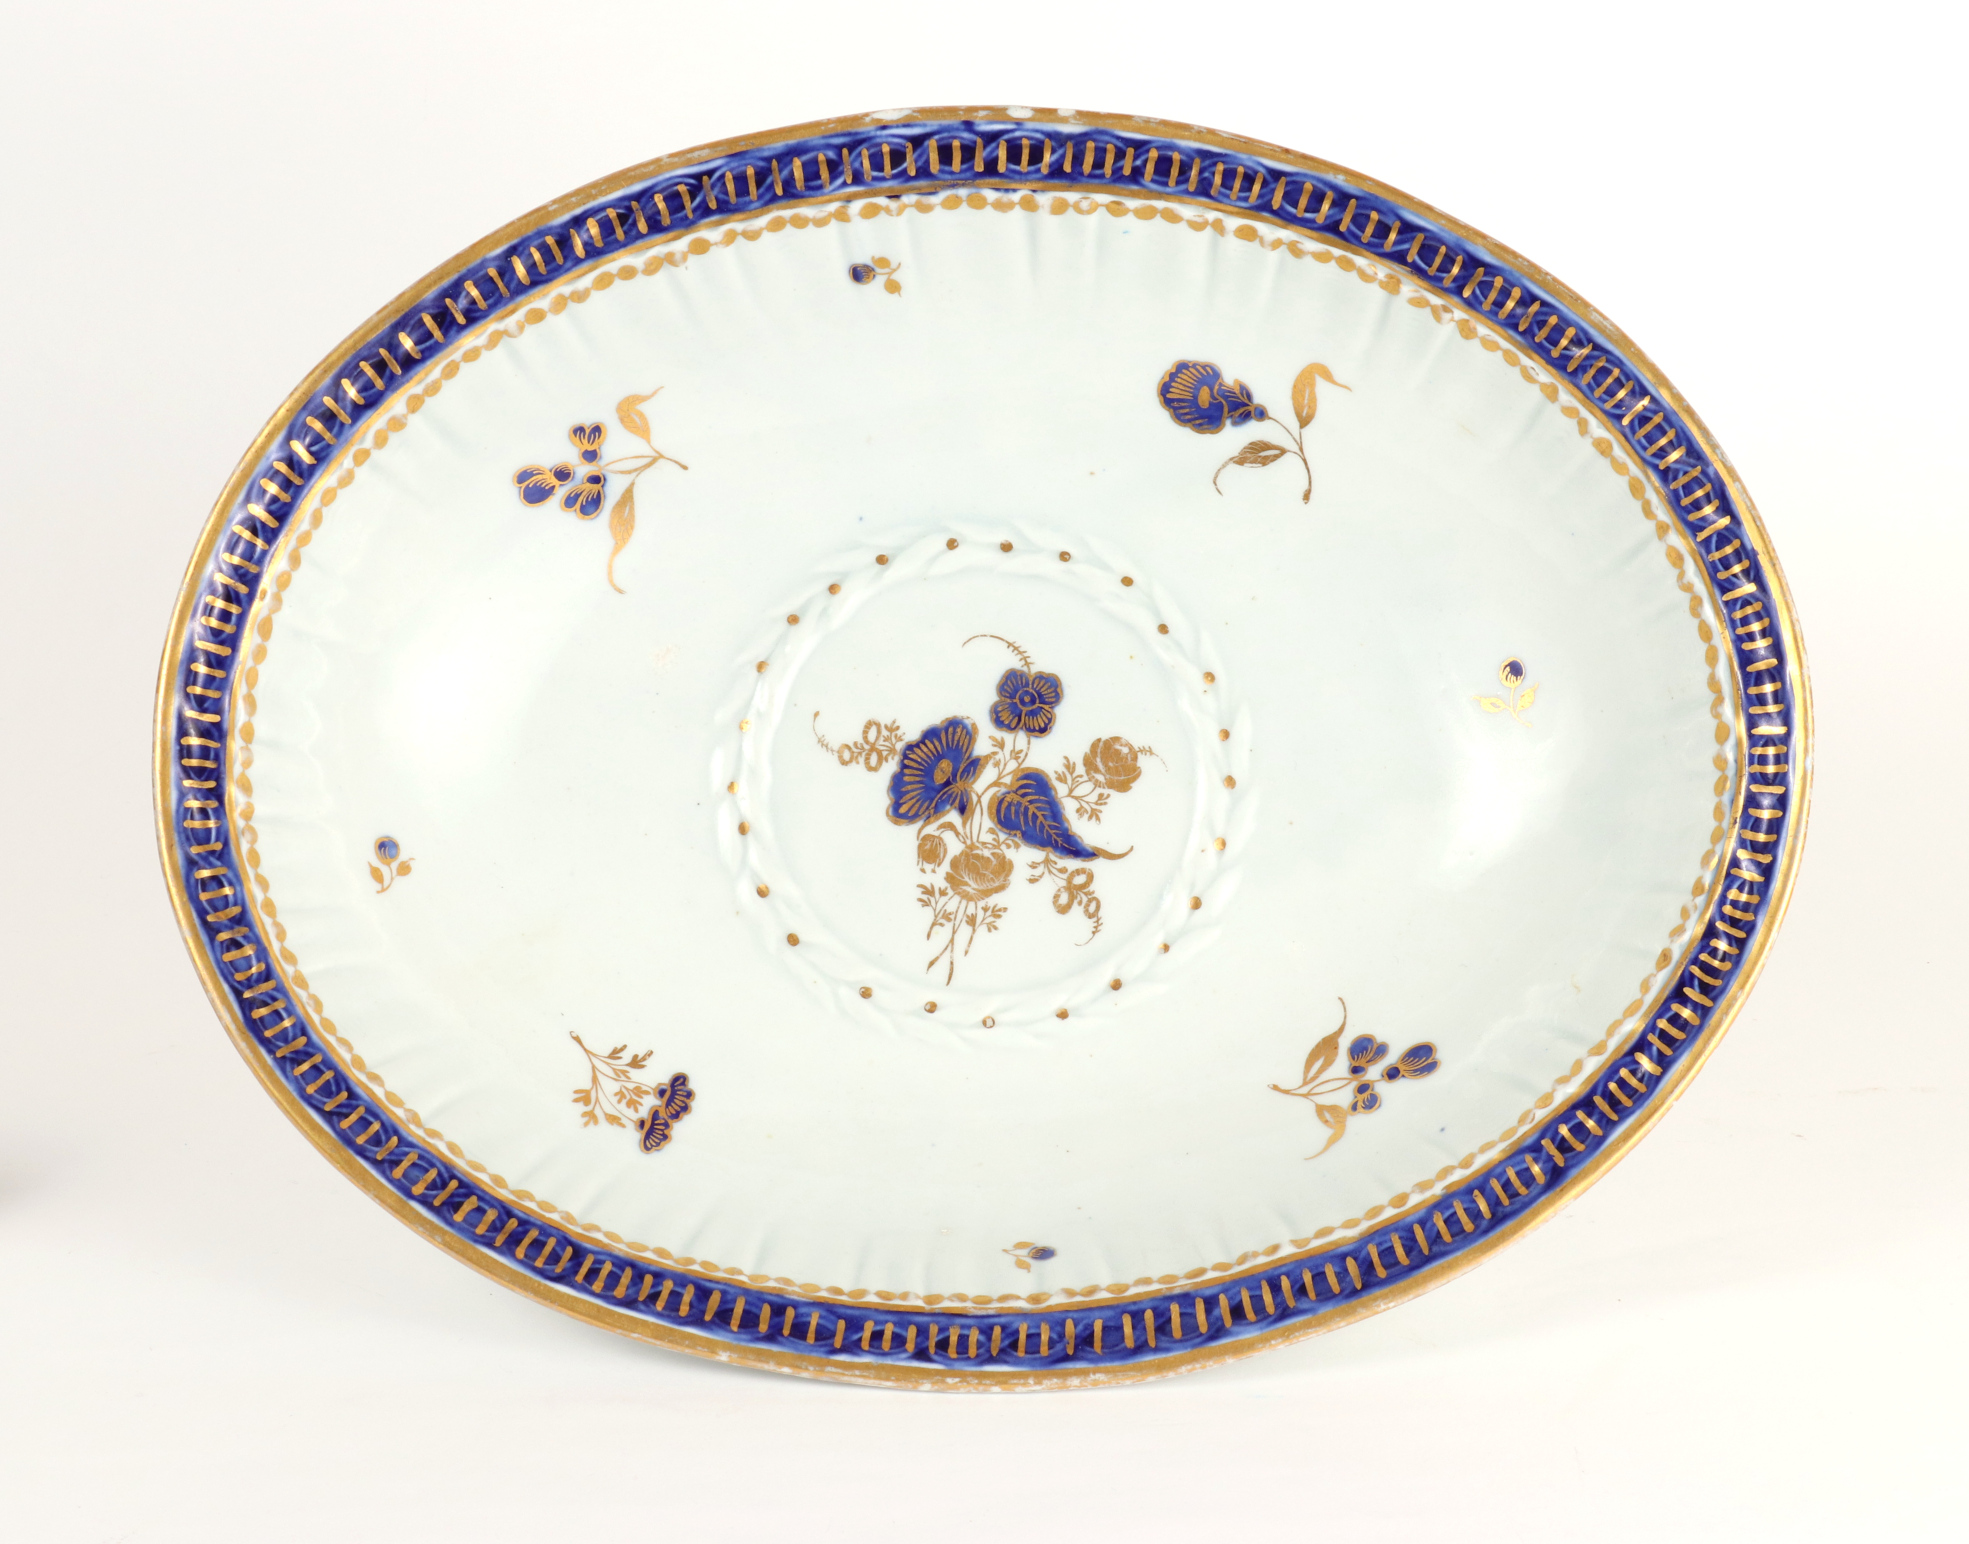 Caughley Oval Bowl, c. 1780-90